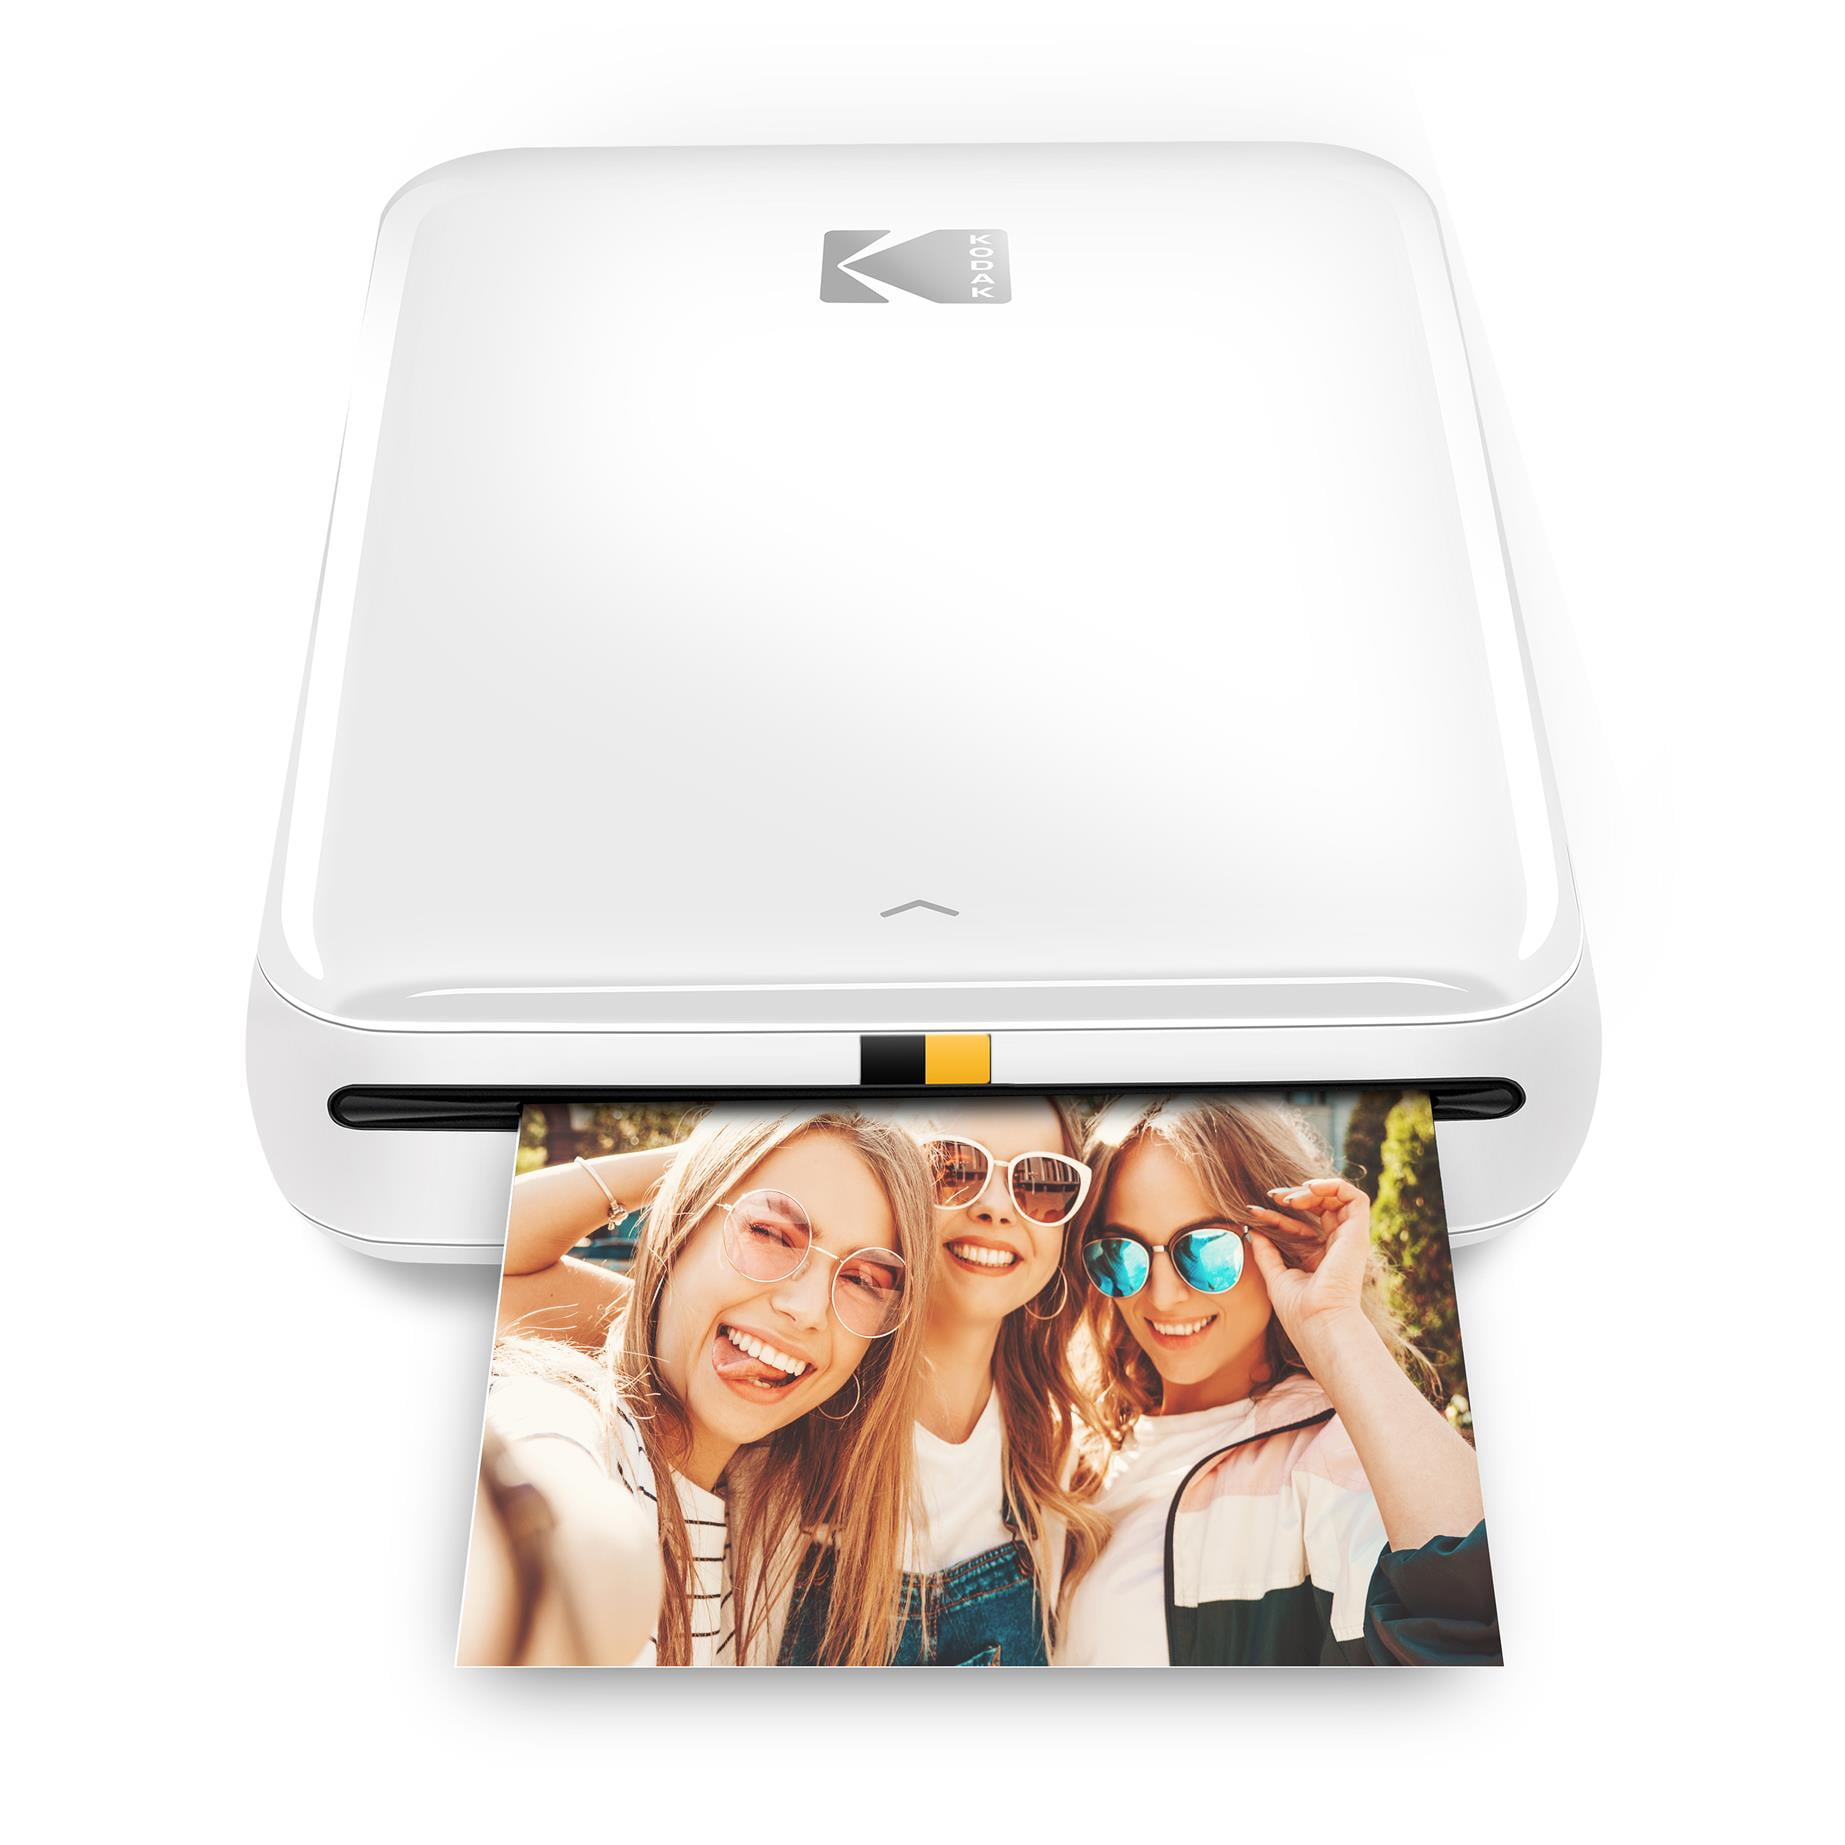 Diplomacy stomach ache To construct Kodak Step Wireless Mobile Photo Printer (White) Compatible w/iOS &  Android, NFC & Bluetooth Devices - Walmart.com